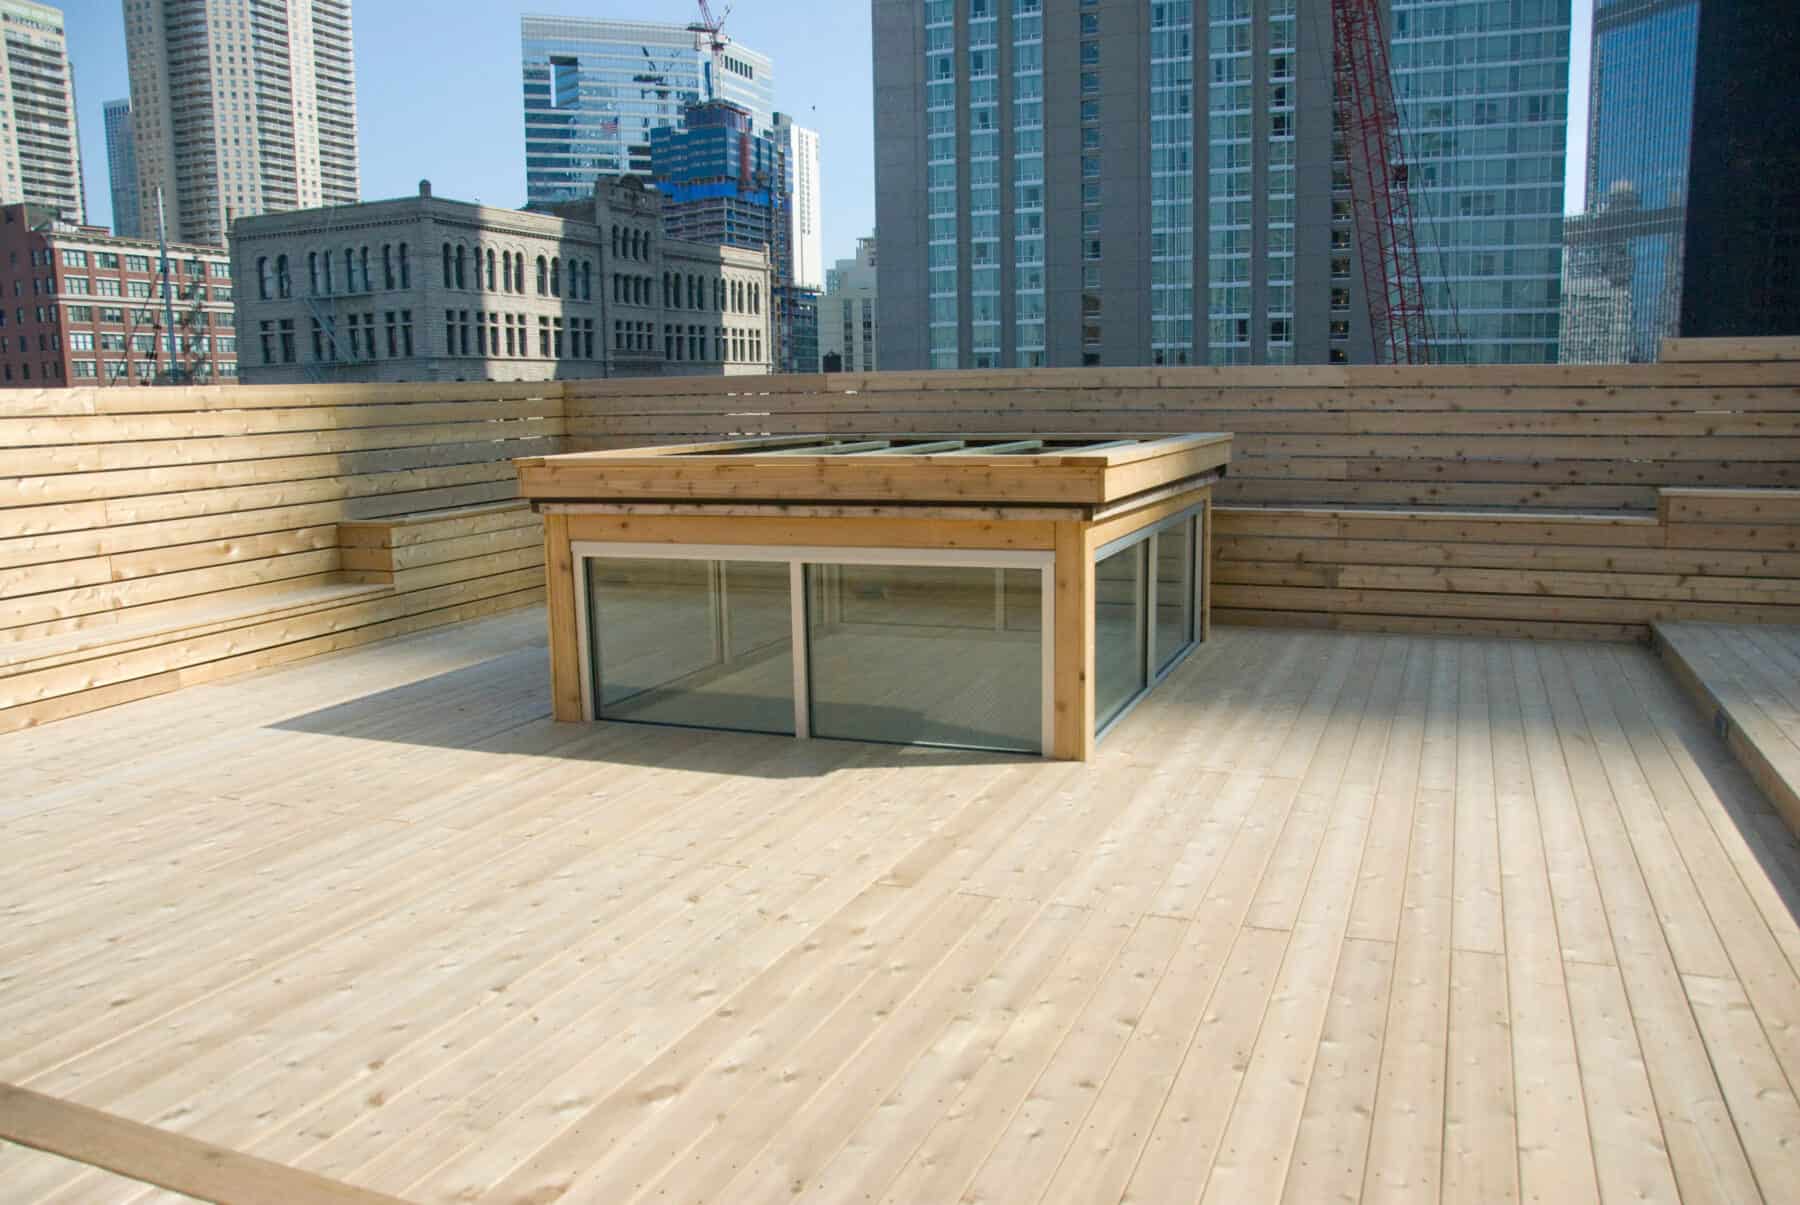 Custom Rooftop Deck with Wood Plant boxes, Skylight, Fence and Walkways from Construction Specialty Projects by Commercial Builder & General Contractor Structural Enterprises